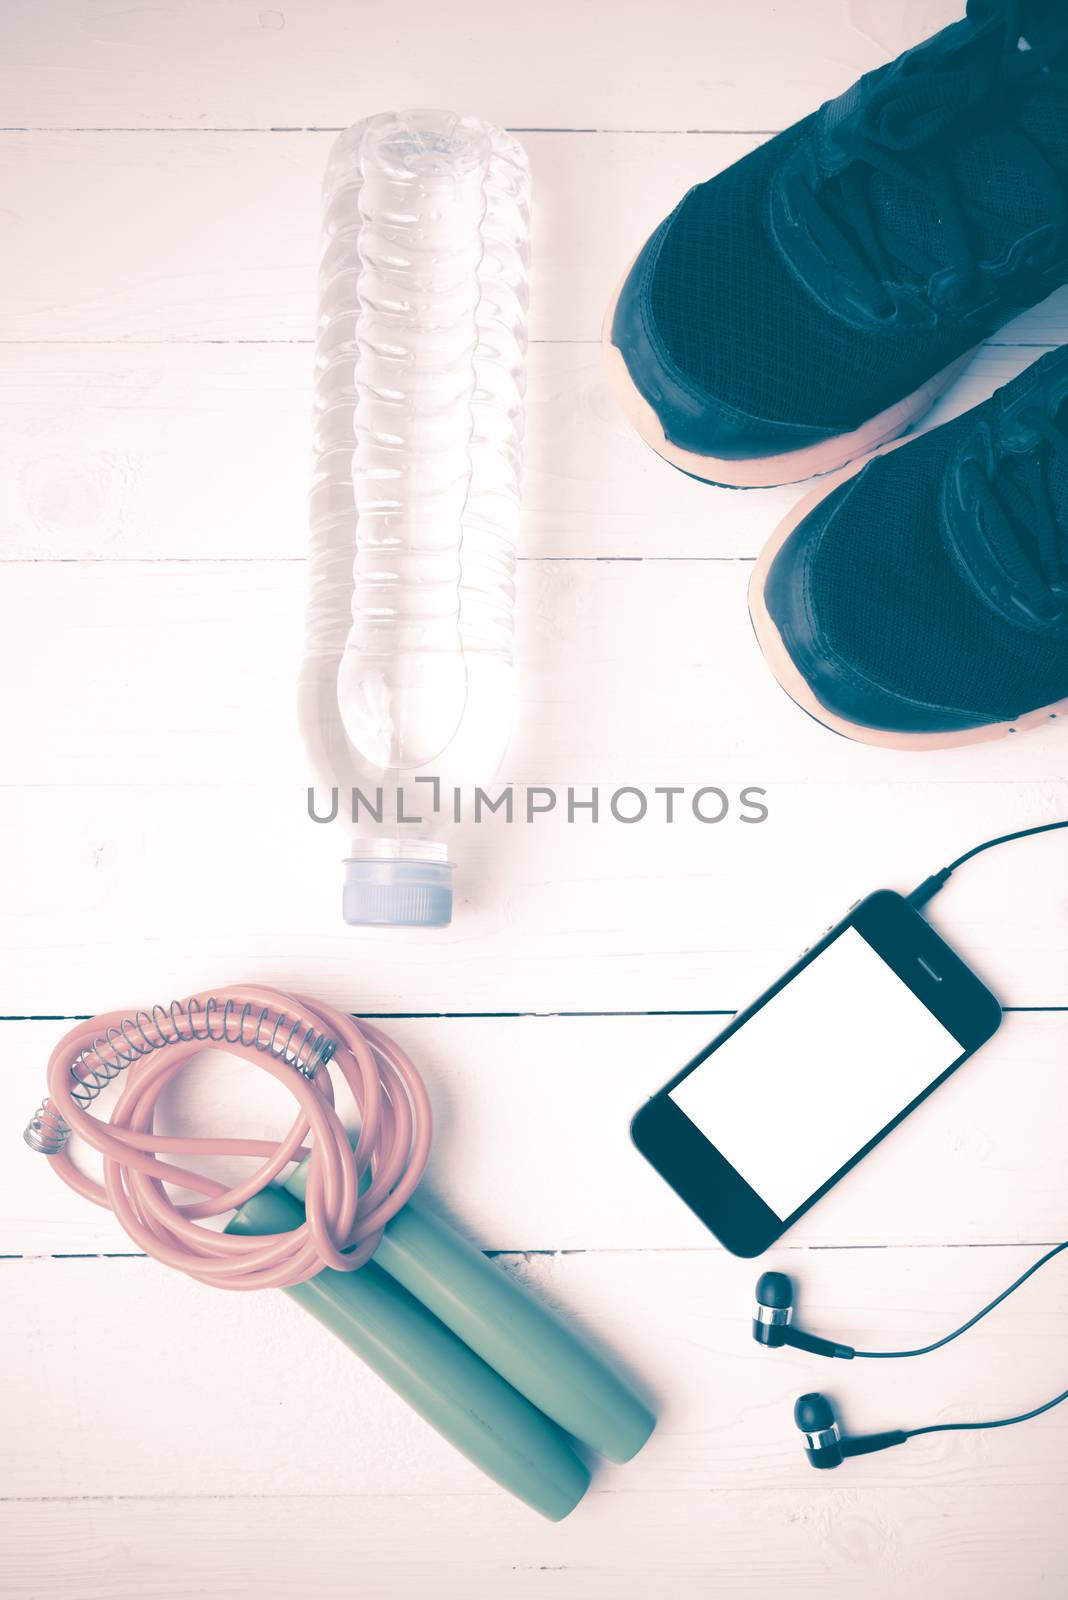 fitness equipment : running shoes,jumping rope,phone and water bottle on white wood table vintage style